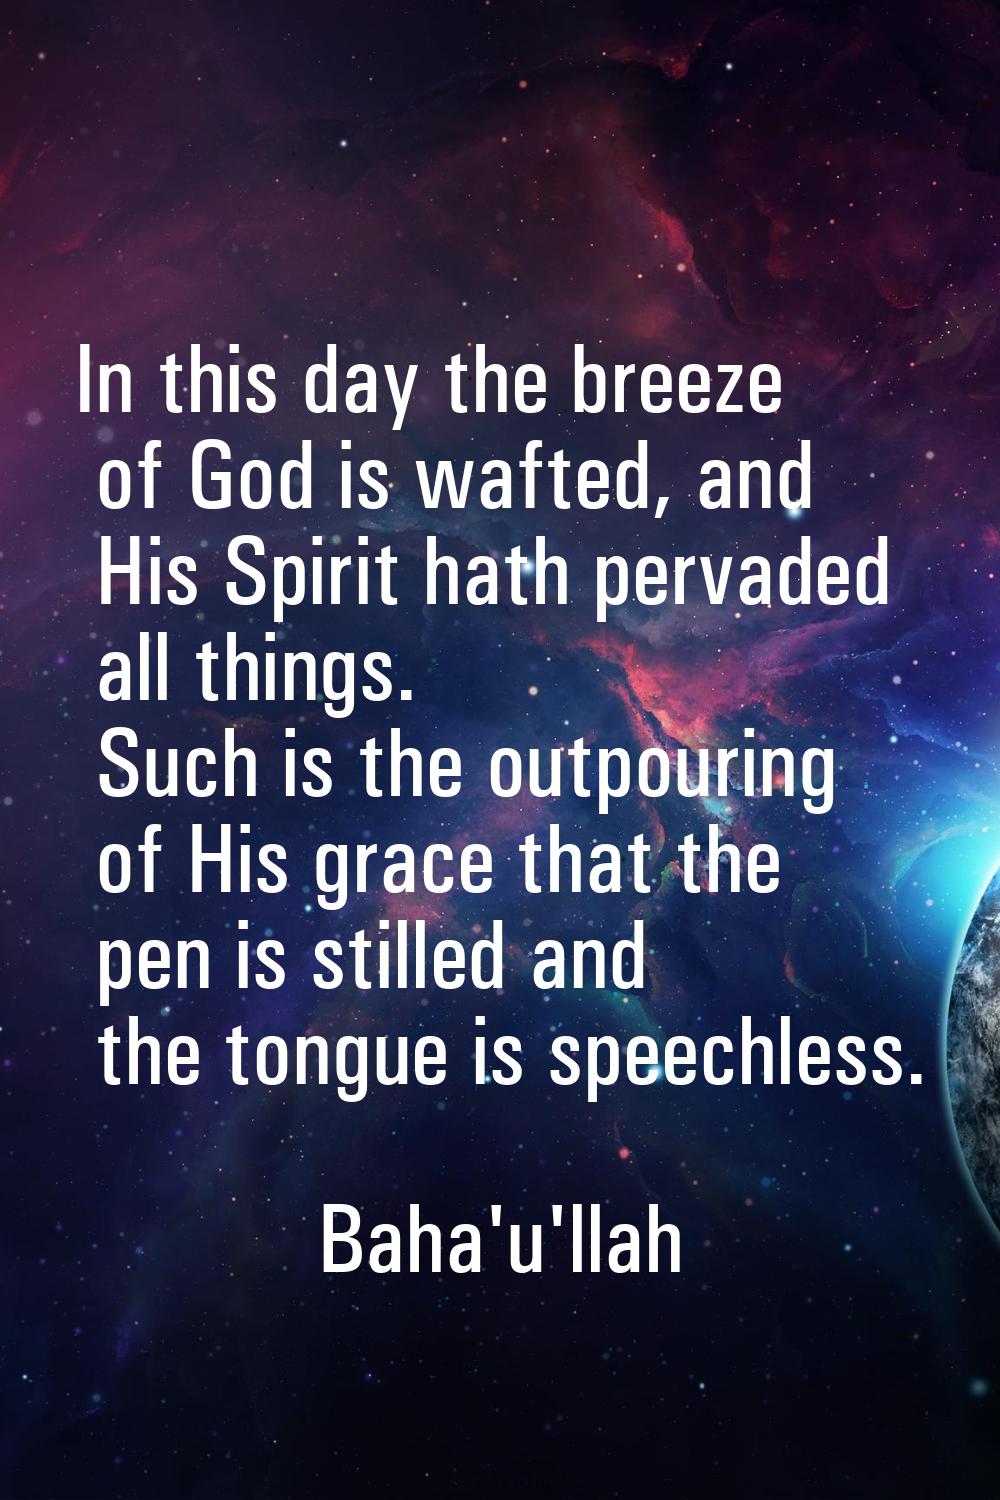 In this day the breeze of God is wafted, and His Spirit hath pervaded all things. Such is the outpo